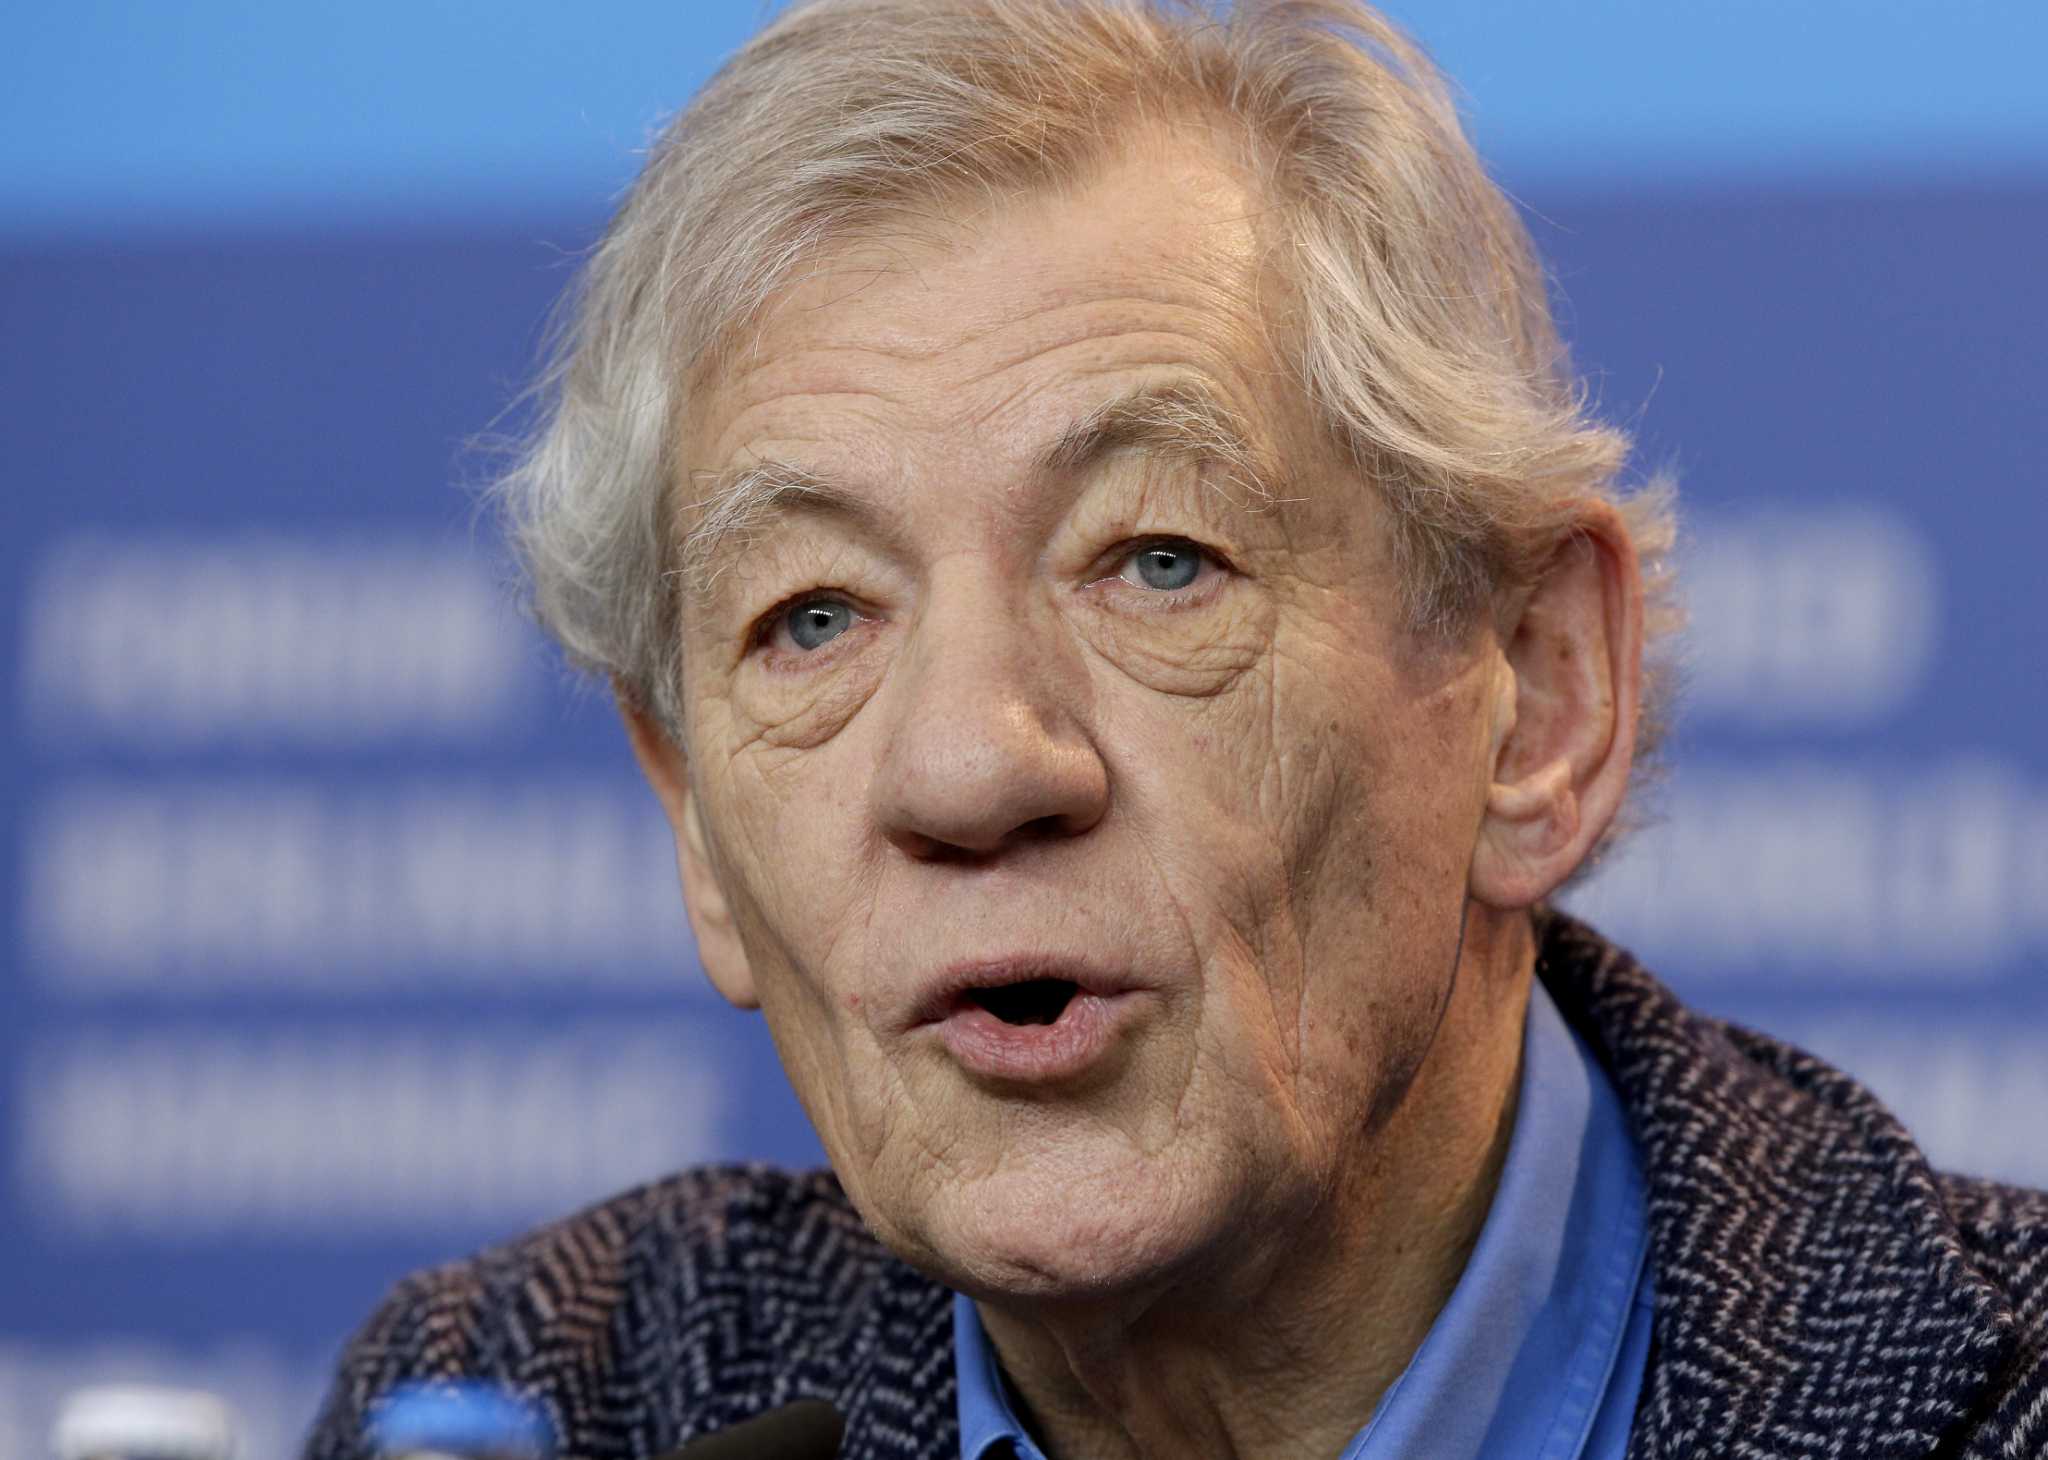 Actor Ian McKellen, 85, is looking forward to returning to work after his fall off a London stage